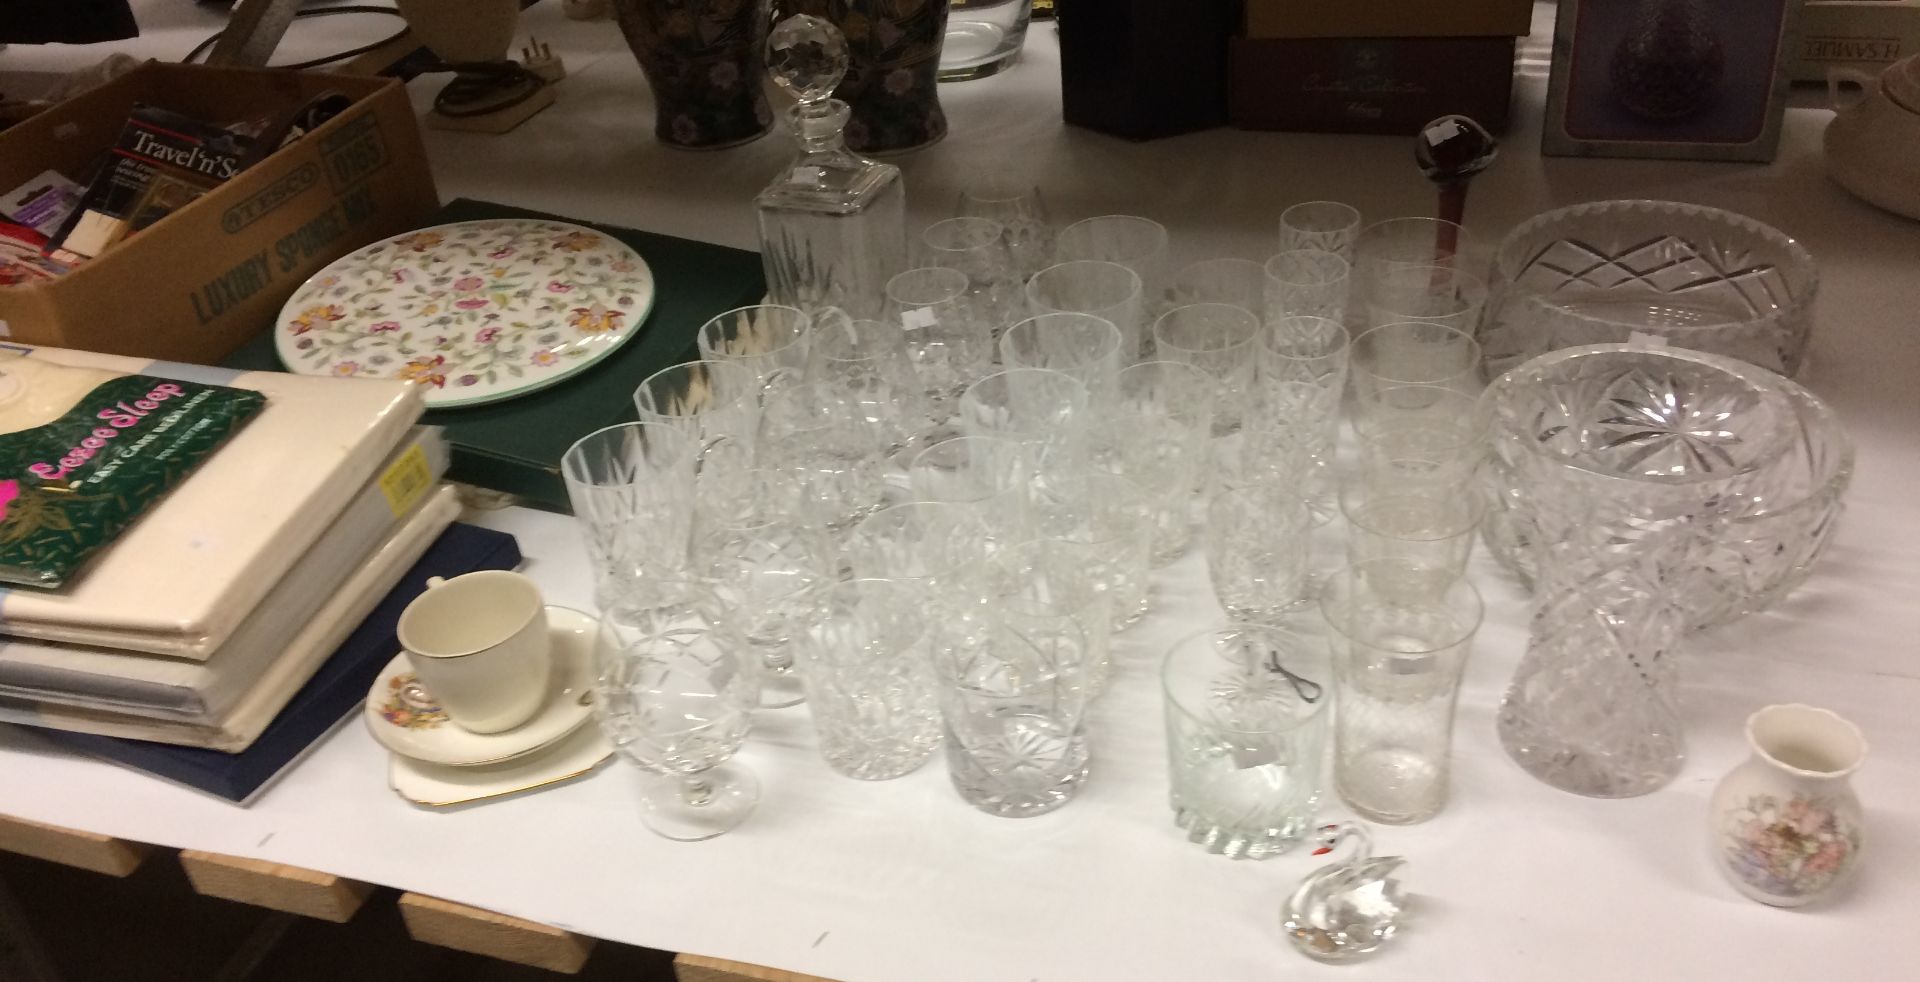 Remaining contents to rack - glassware including bowls, decanter, glasses,